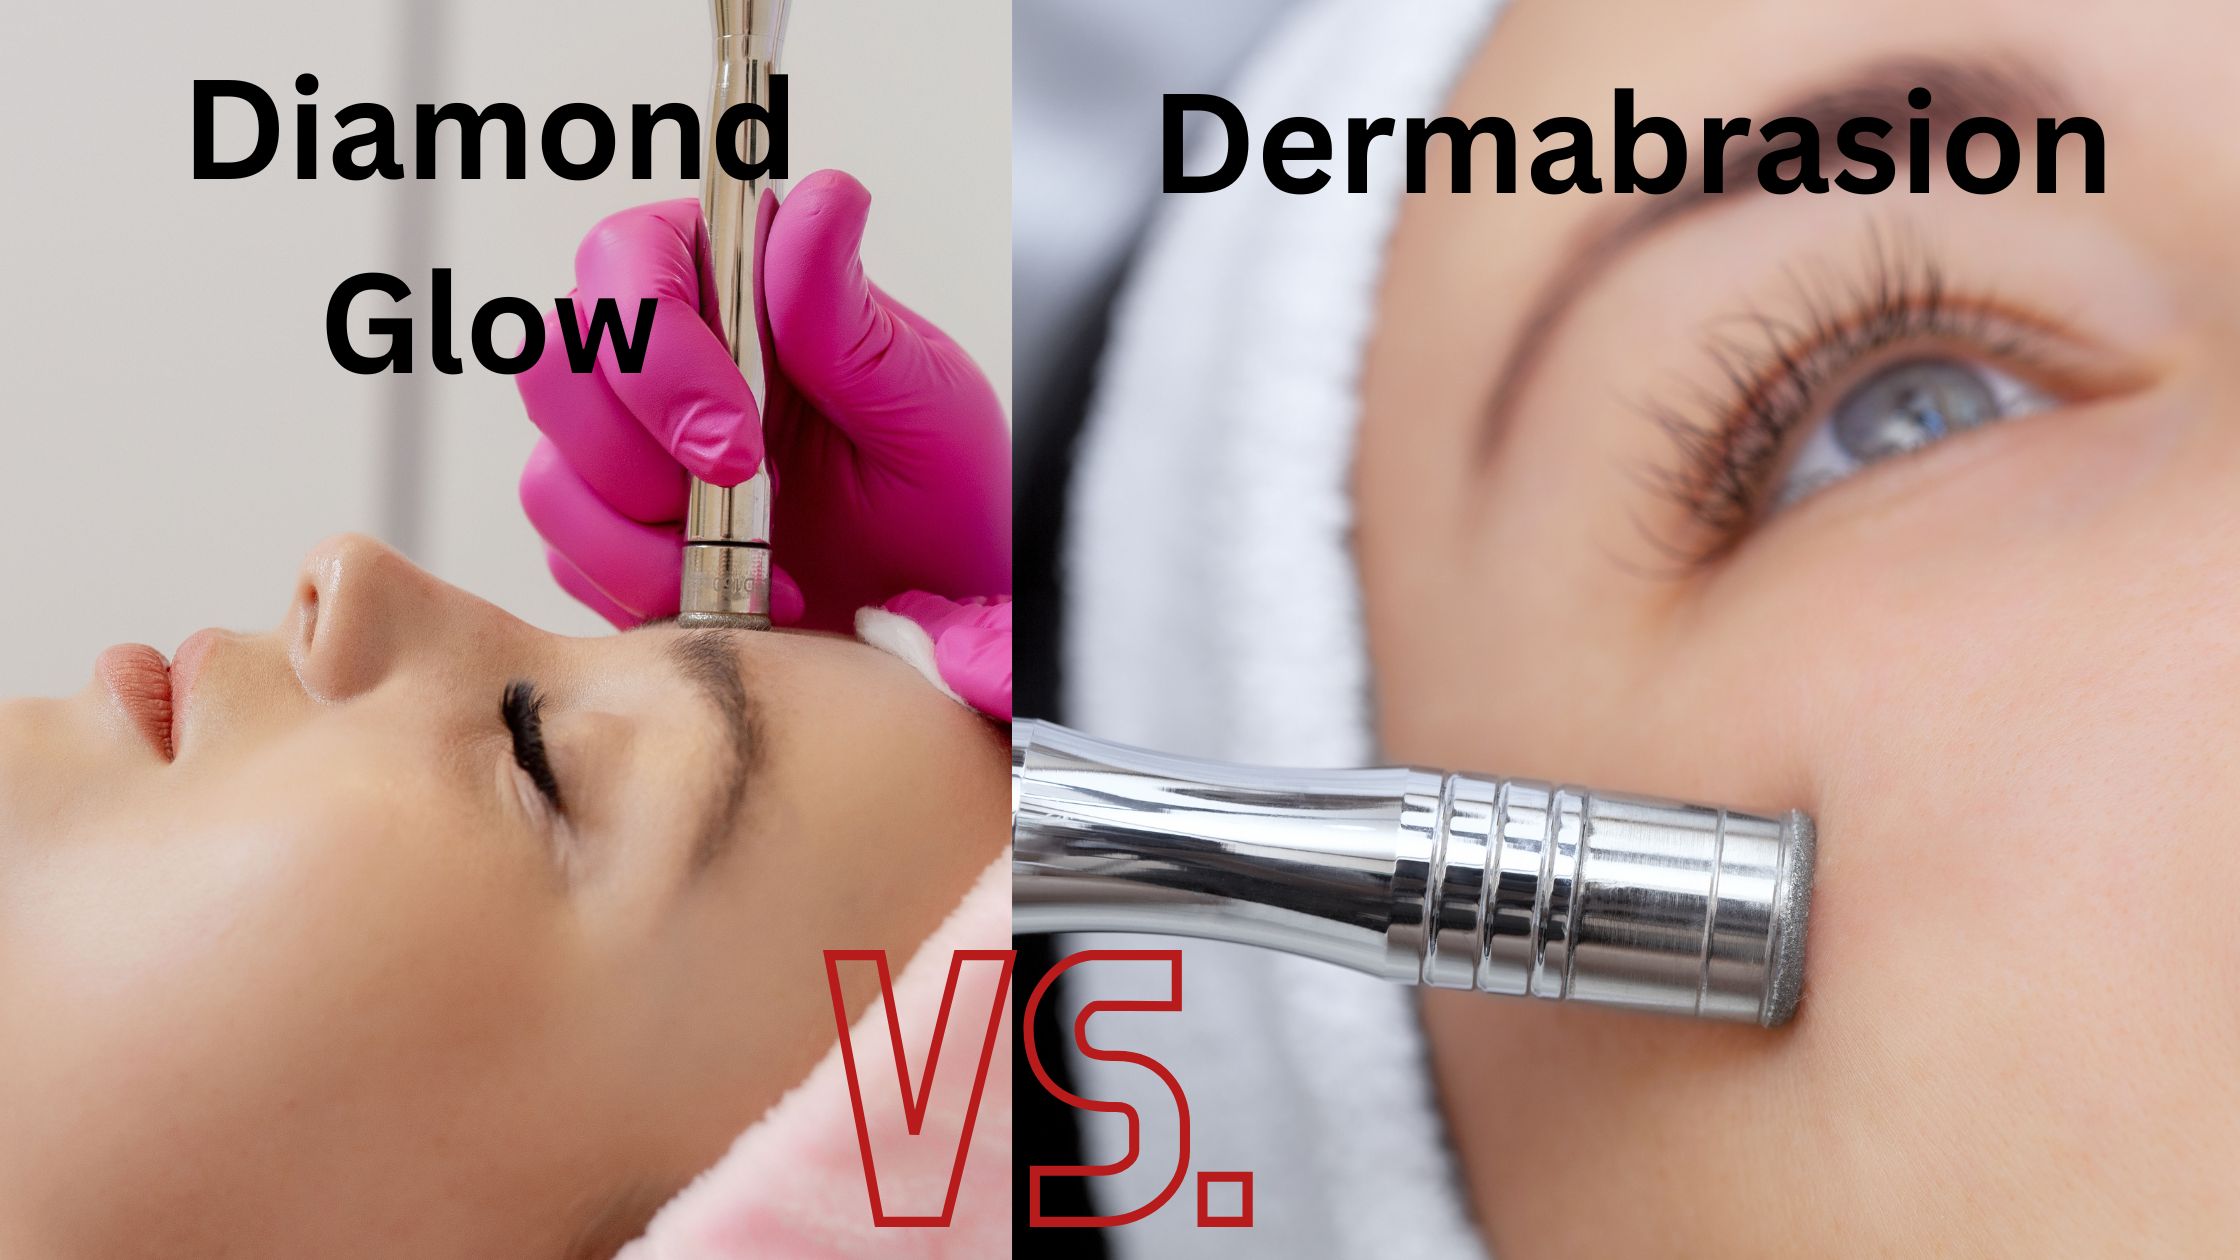 Diamond Glow vs Dermabrasion: What Is The Difference?